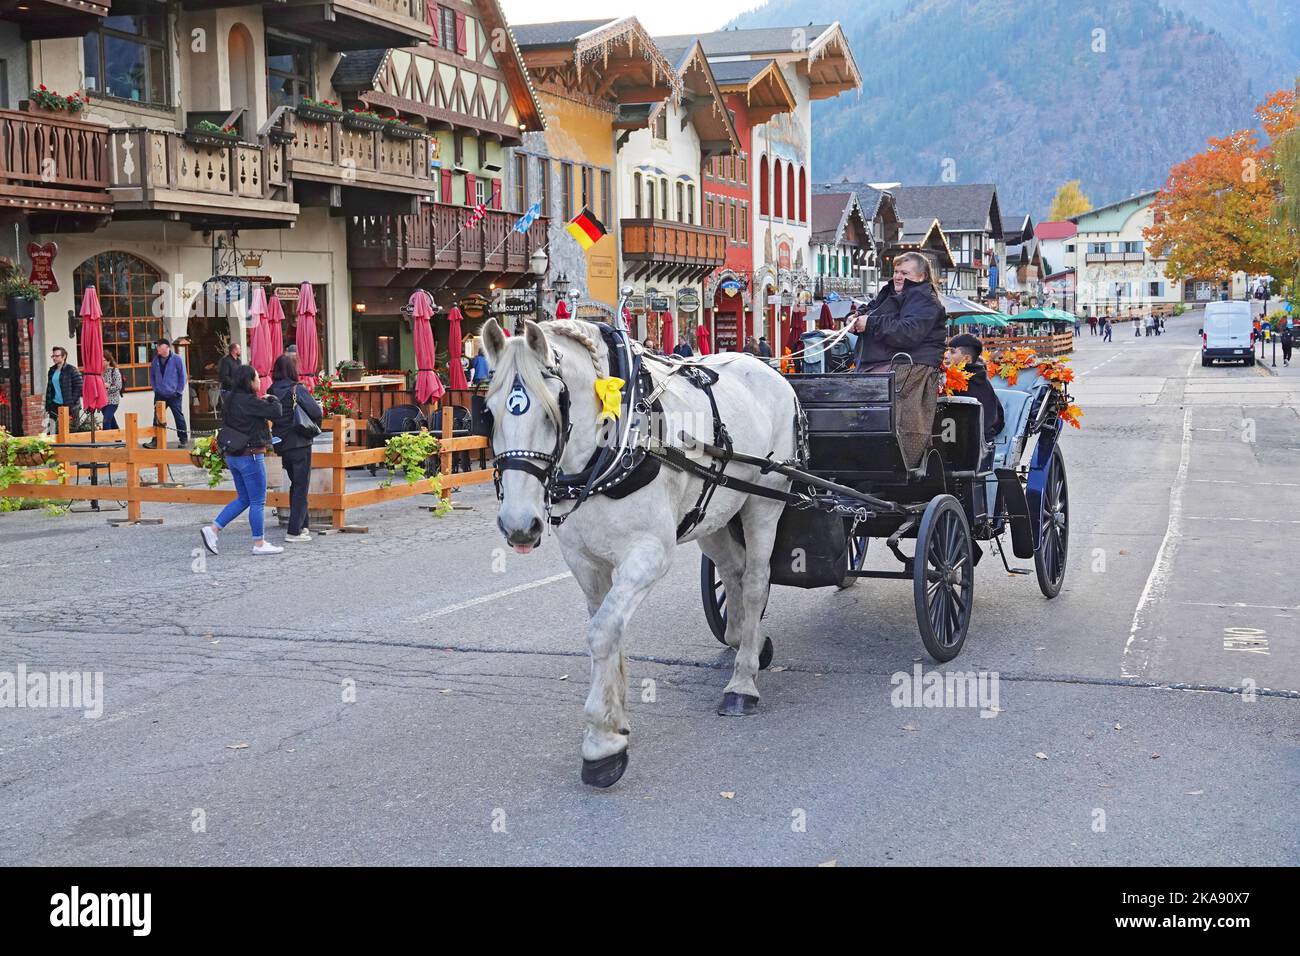 A horse drawn carriage carries tourists and visitors around the streets of the small, Bavarian-style town of Leavenworth, Washington. Stock Photo